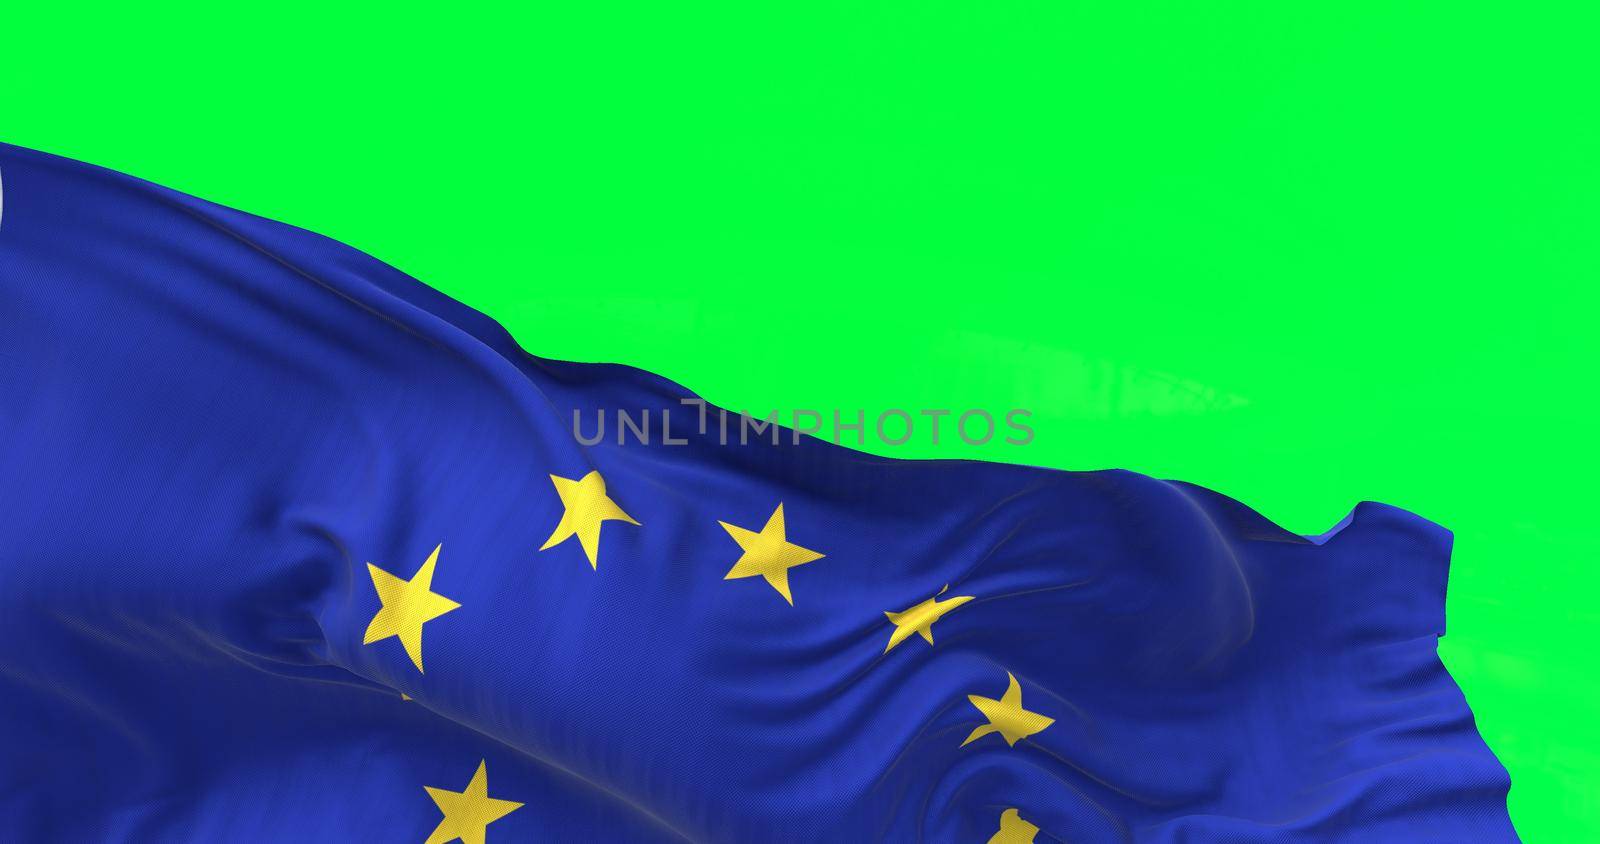 Detail of the flag of The European Union waving in the wind by rarrarorro